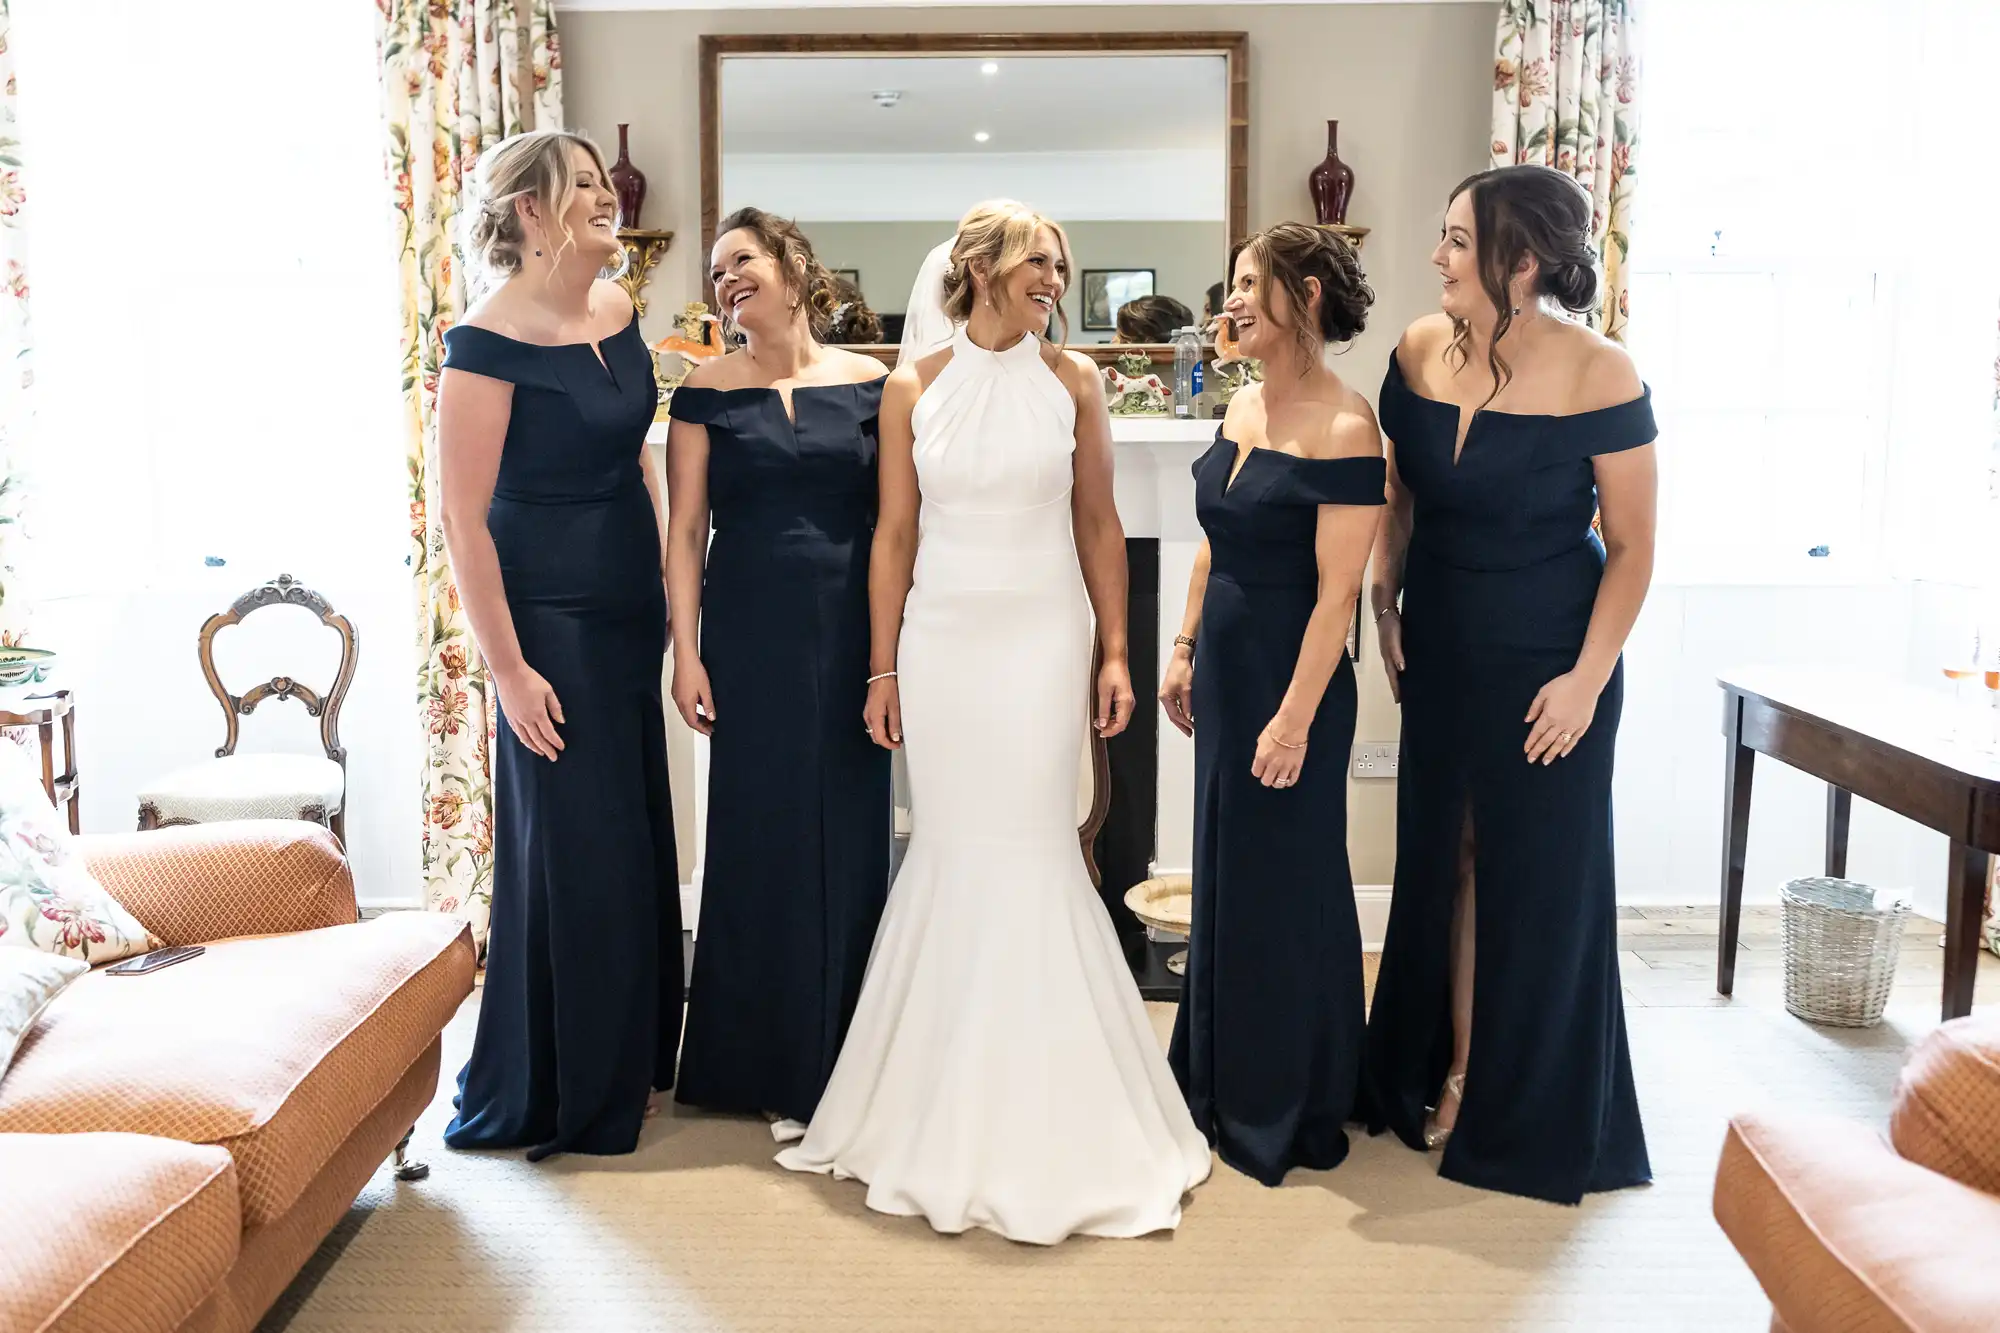 A bride in a white dress stands smiling with four bridesmaids in navy off-shoulder dresses in a warmly lit room.